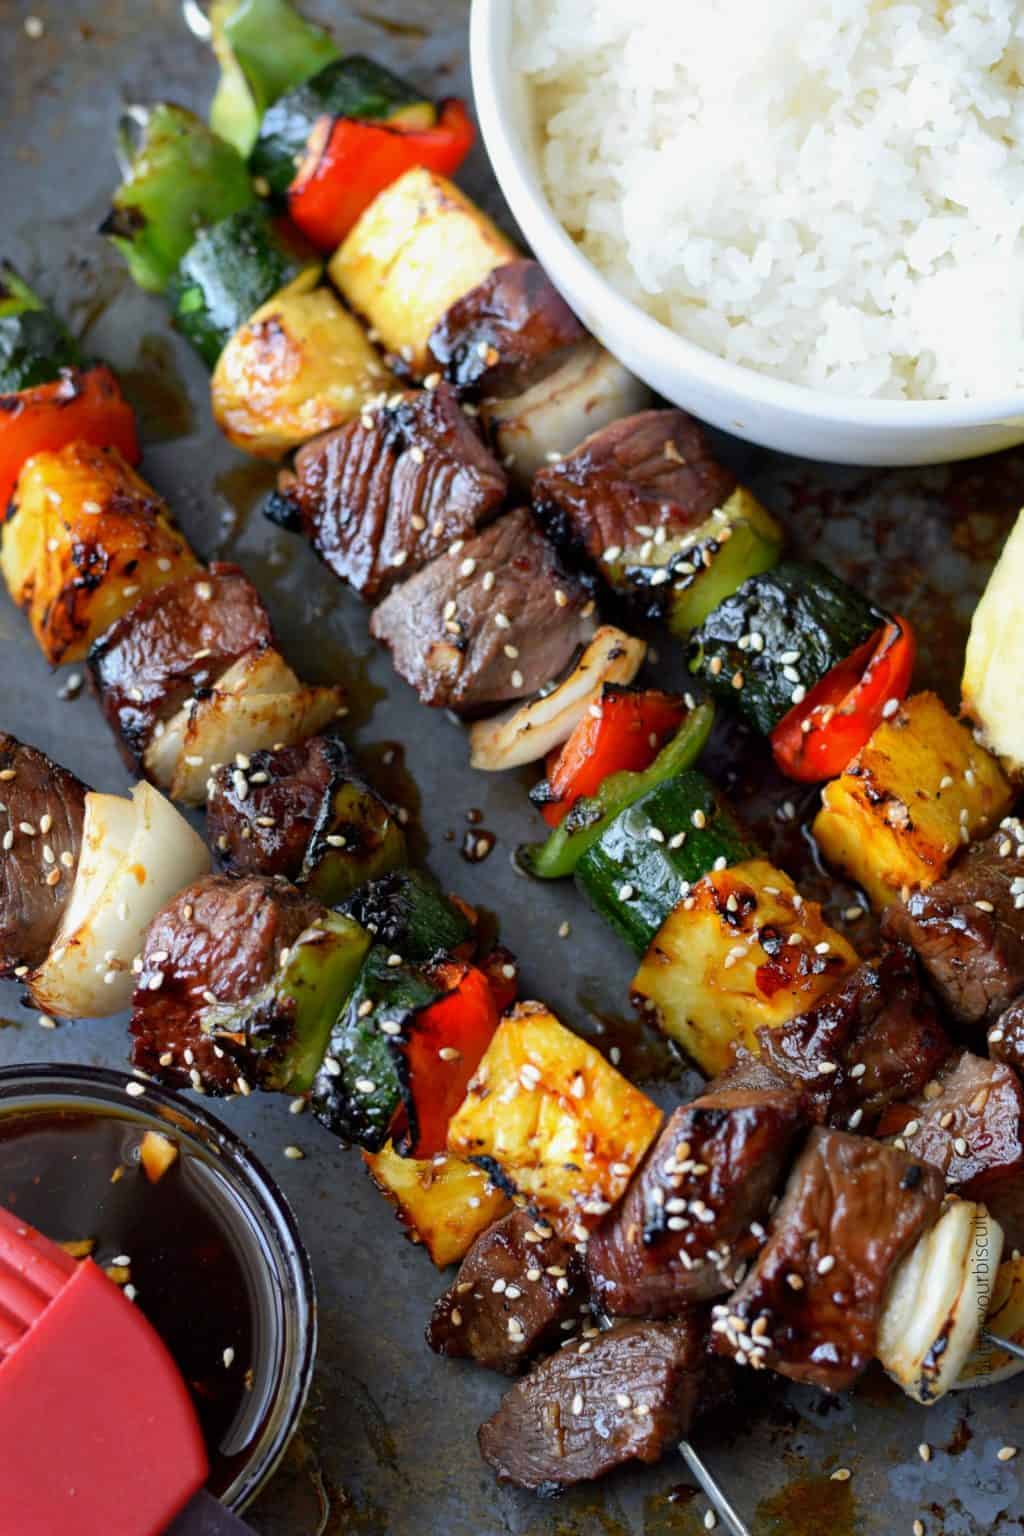 Grilled beef and vegetable skewers with pineapple chunks served next to a bowl of white rice, sprinkled with sesame seeds on a rustic metal surface.